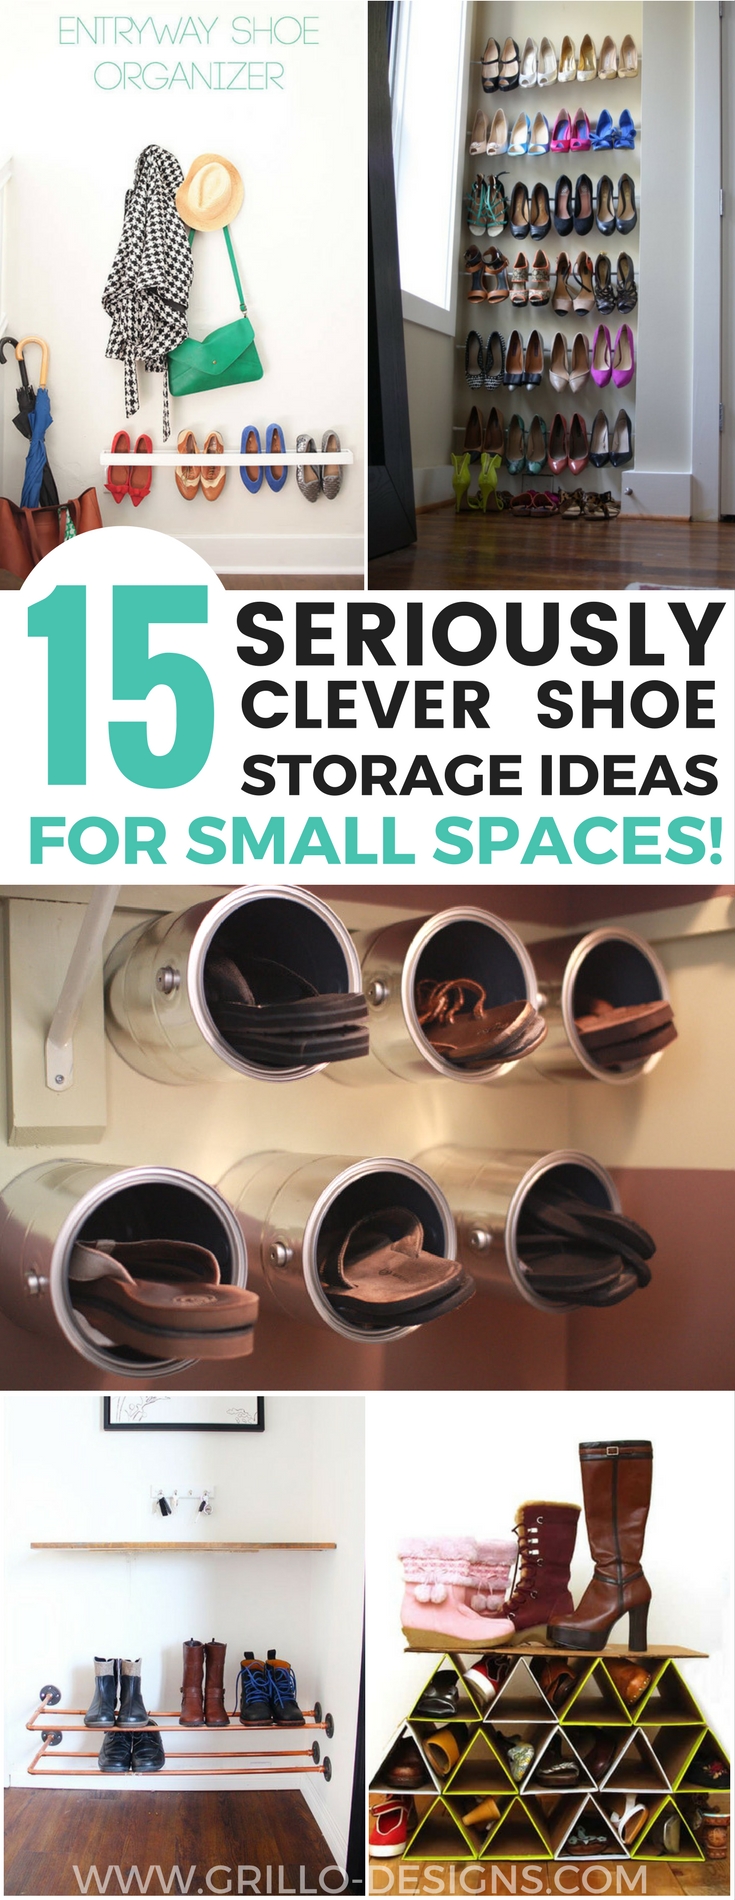 15 Clever Diy Shoe Storage Ideas Grillo Designs Shoe and boot storage can be a problem in the winter when they create clutter around the entryway. 15 clever diy shoe storage ideas